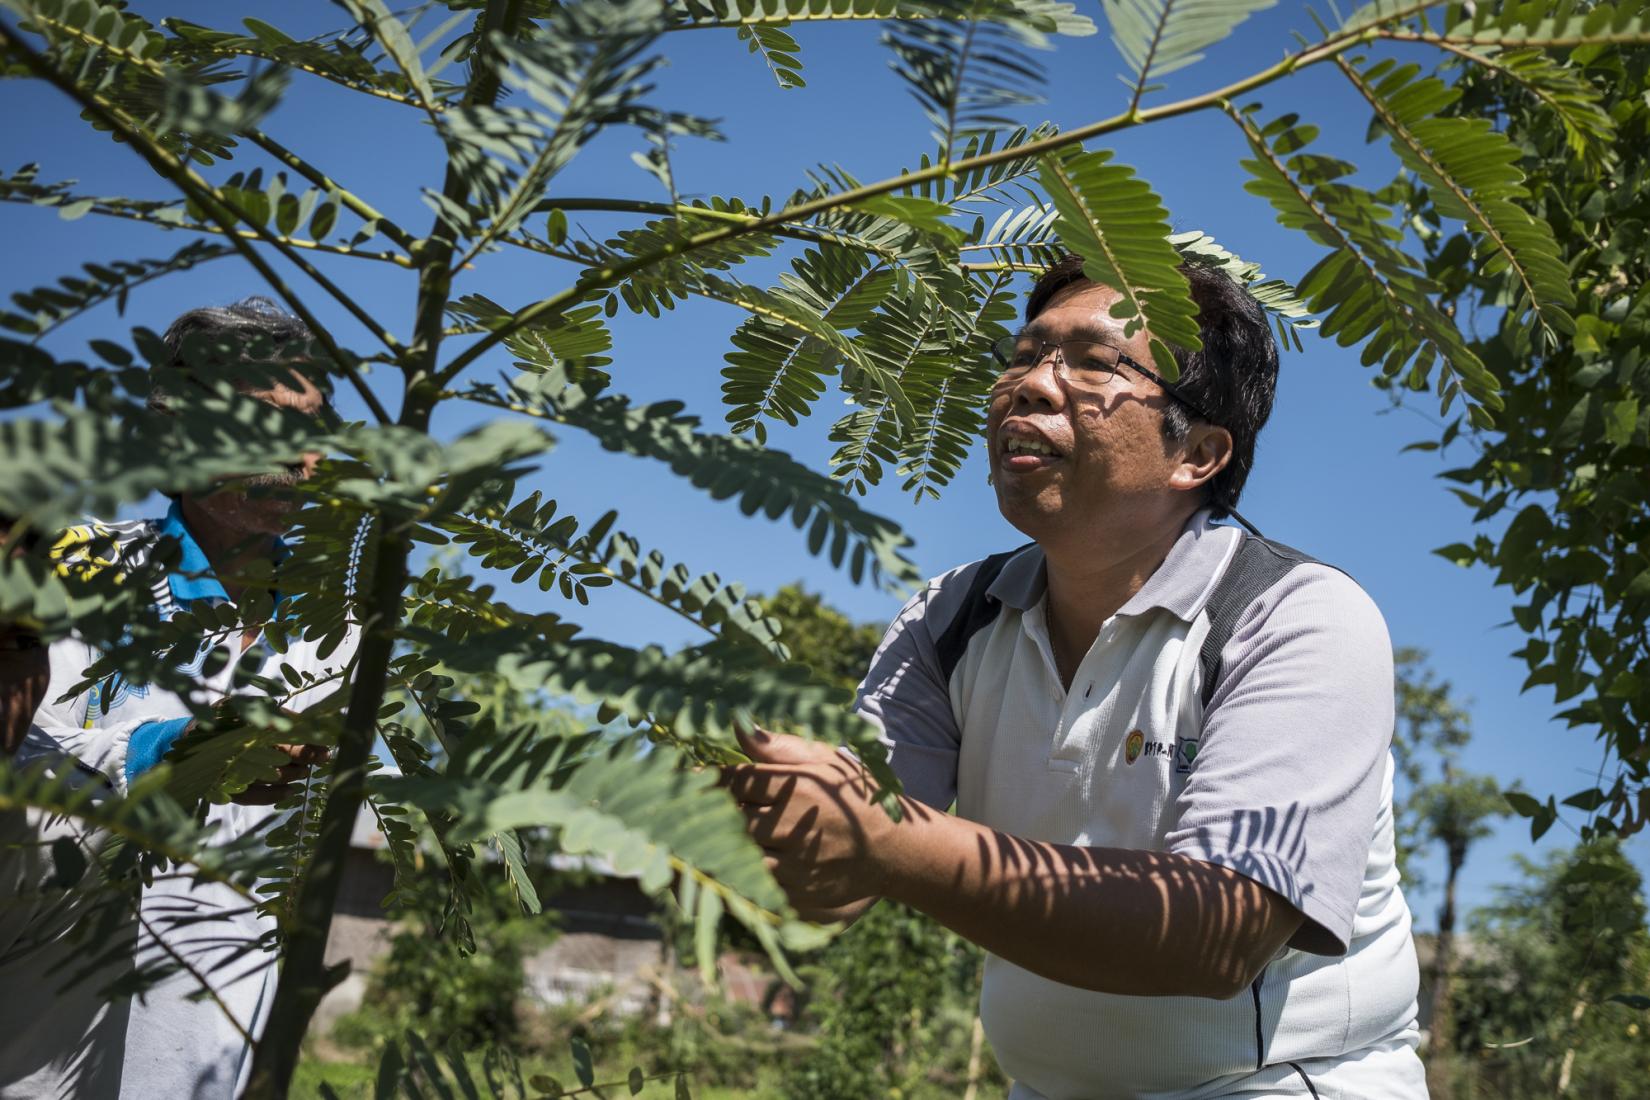 Dr Tanda Panjaitan inspects a Sesbania grandiflora tree. Sesbania is a tree legume rich in protein and great for fattening cattle.